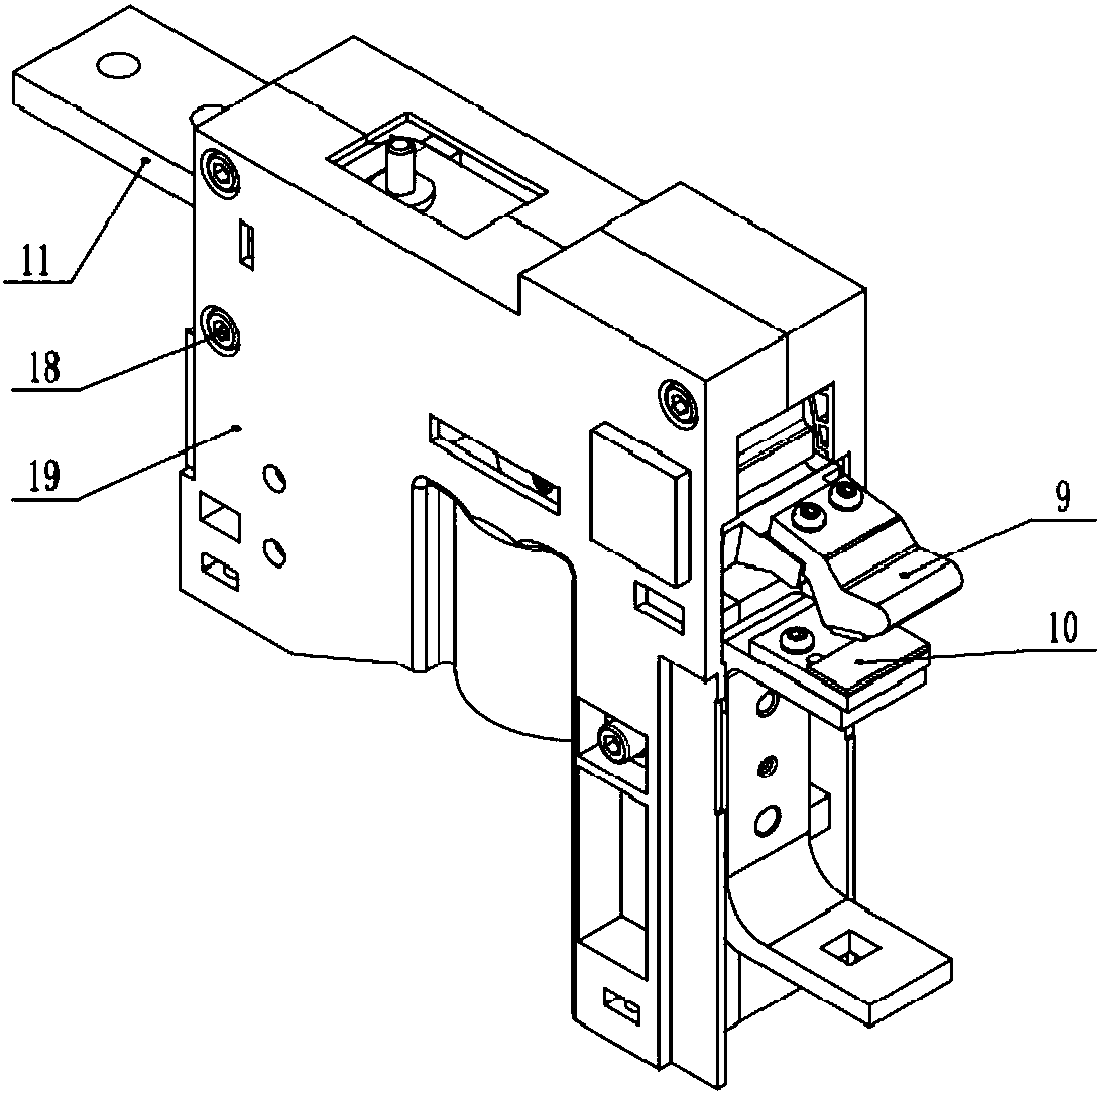 Transmission connection structure for high current DC contactor